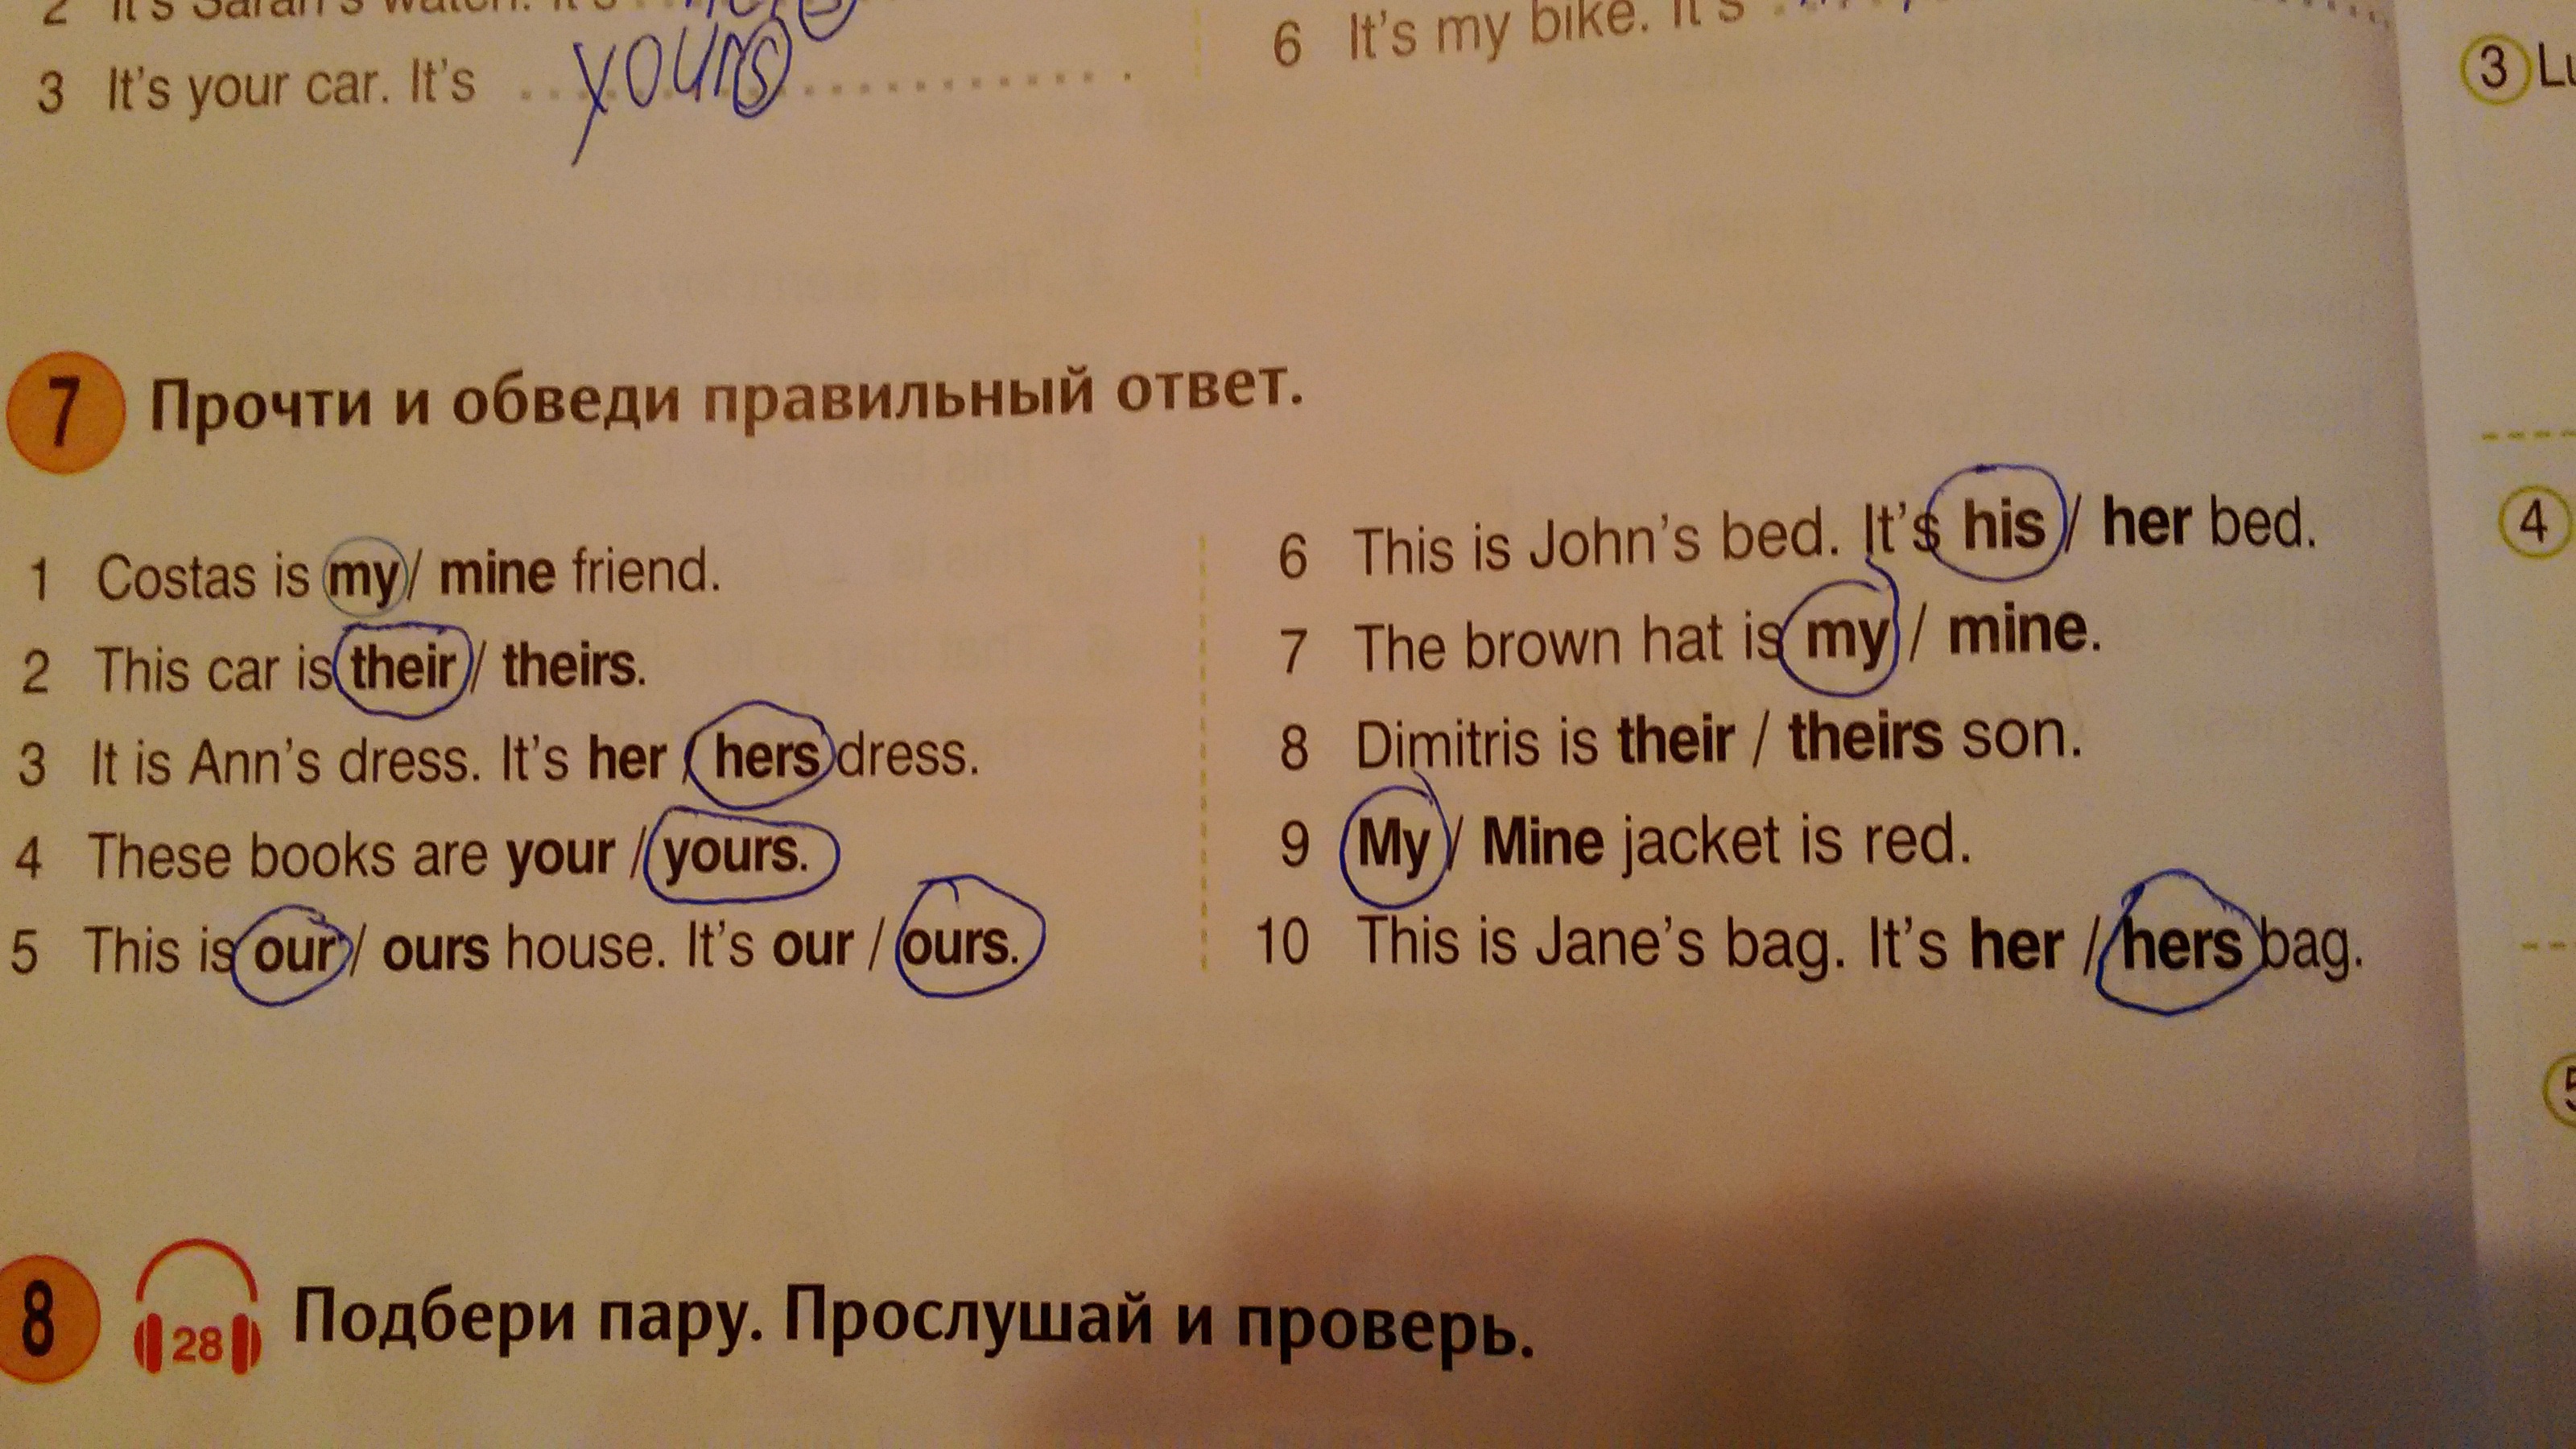 Write the correct word with self. That's not my car.... Прочти и обведи правильный ответ. Обведи правильный ответ английский. Прочитай и обведи правильный ответ.